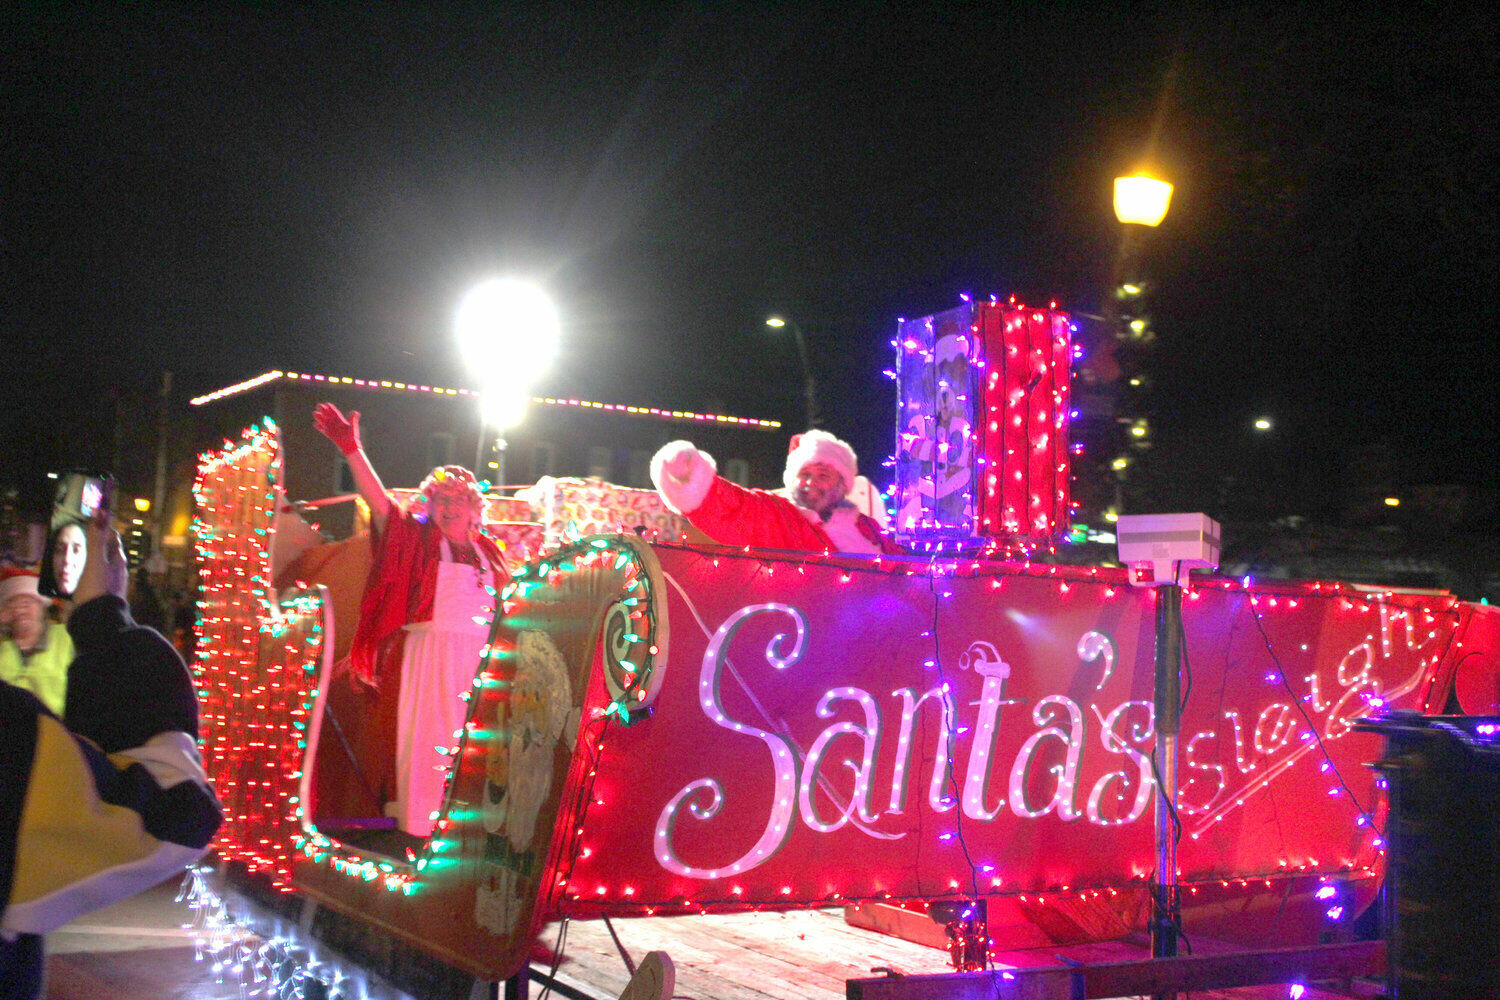 Santa and Mrs. Claus arrive in downtown Warrensburg in Santa’s sleigh during the Holiday Parade on Friday, Dec. 2, 2022. The sixth annual Holiday Parade will be hosted at 6 p.m. Friday, Dec. 1 in downtown Warrensburg.